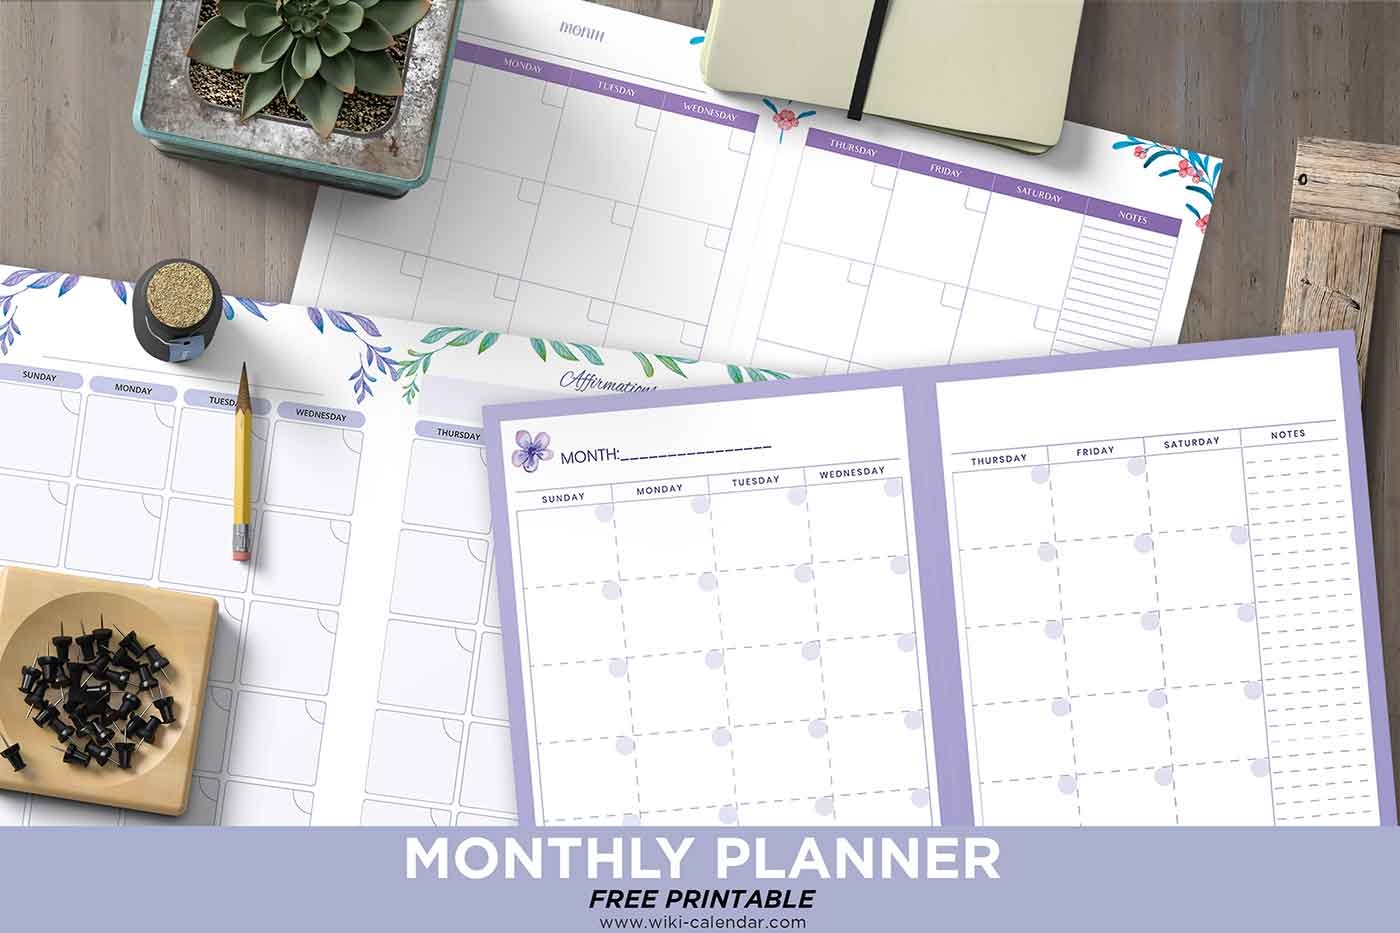 Free Printable Monthly Planner For 2024 Templates - Wiki Calendar within Free Printable Calendar 2024 2 Page Spread